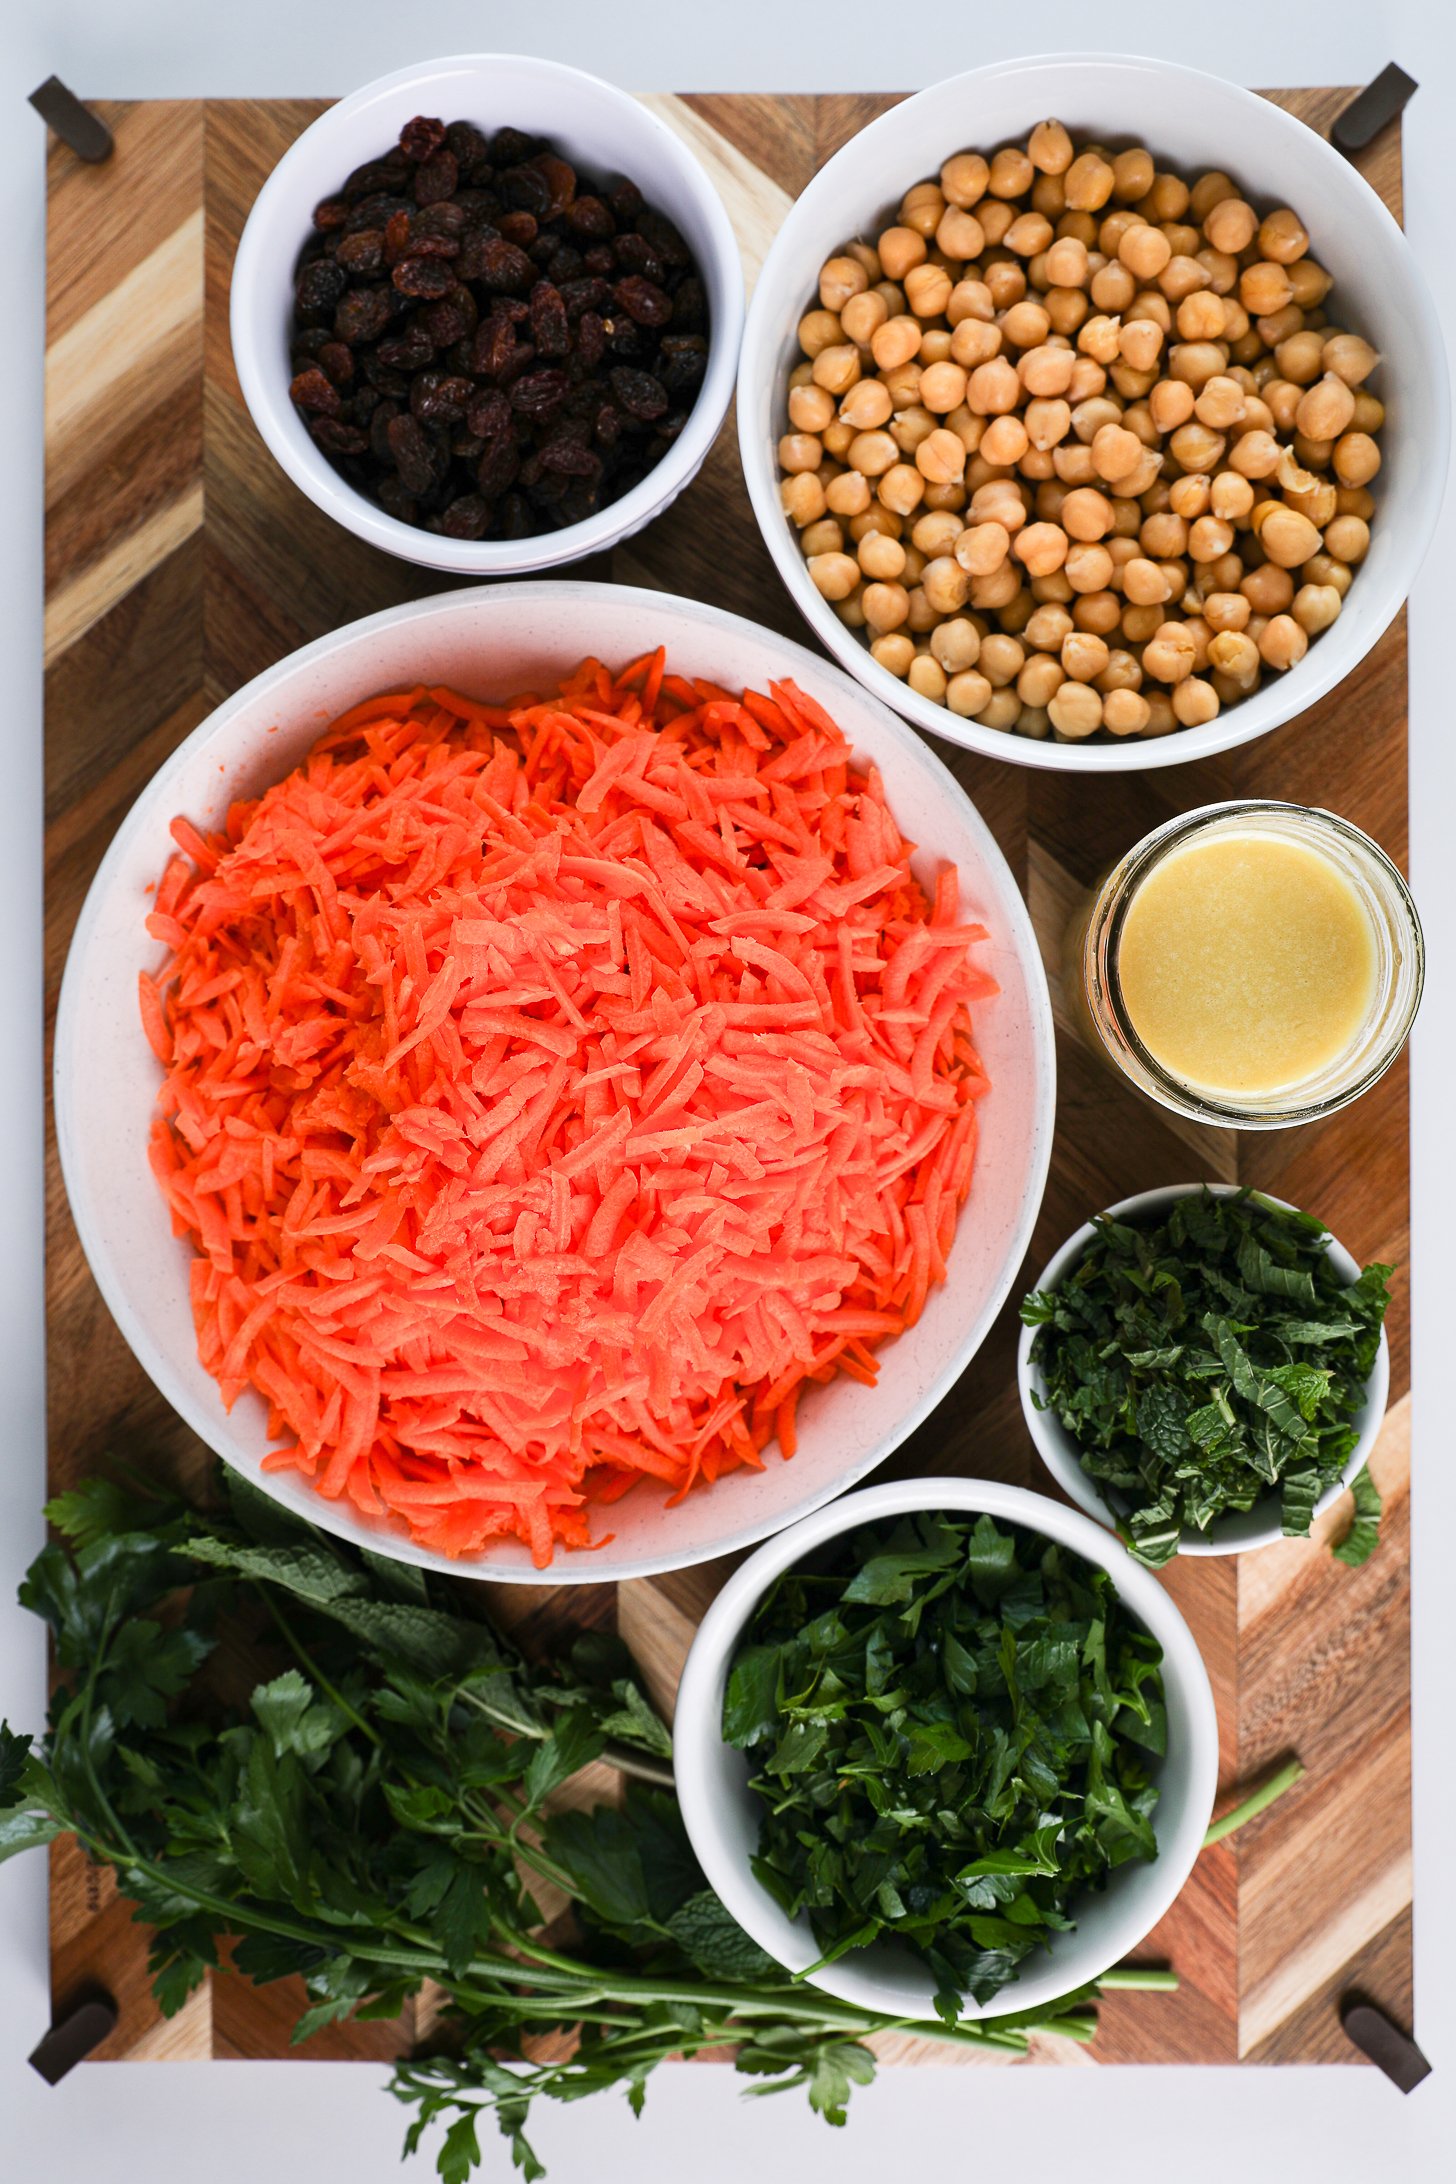 A selection of food ingredients like grated carrots, chickpeas, raisins, fresh herbs and dressing.